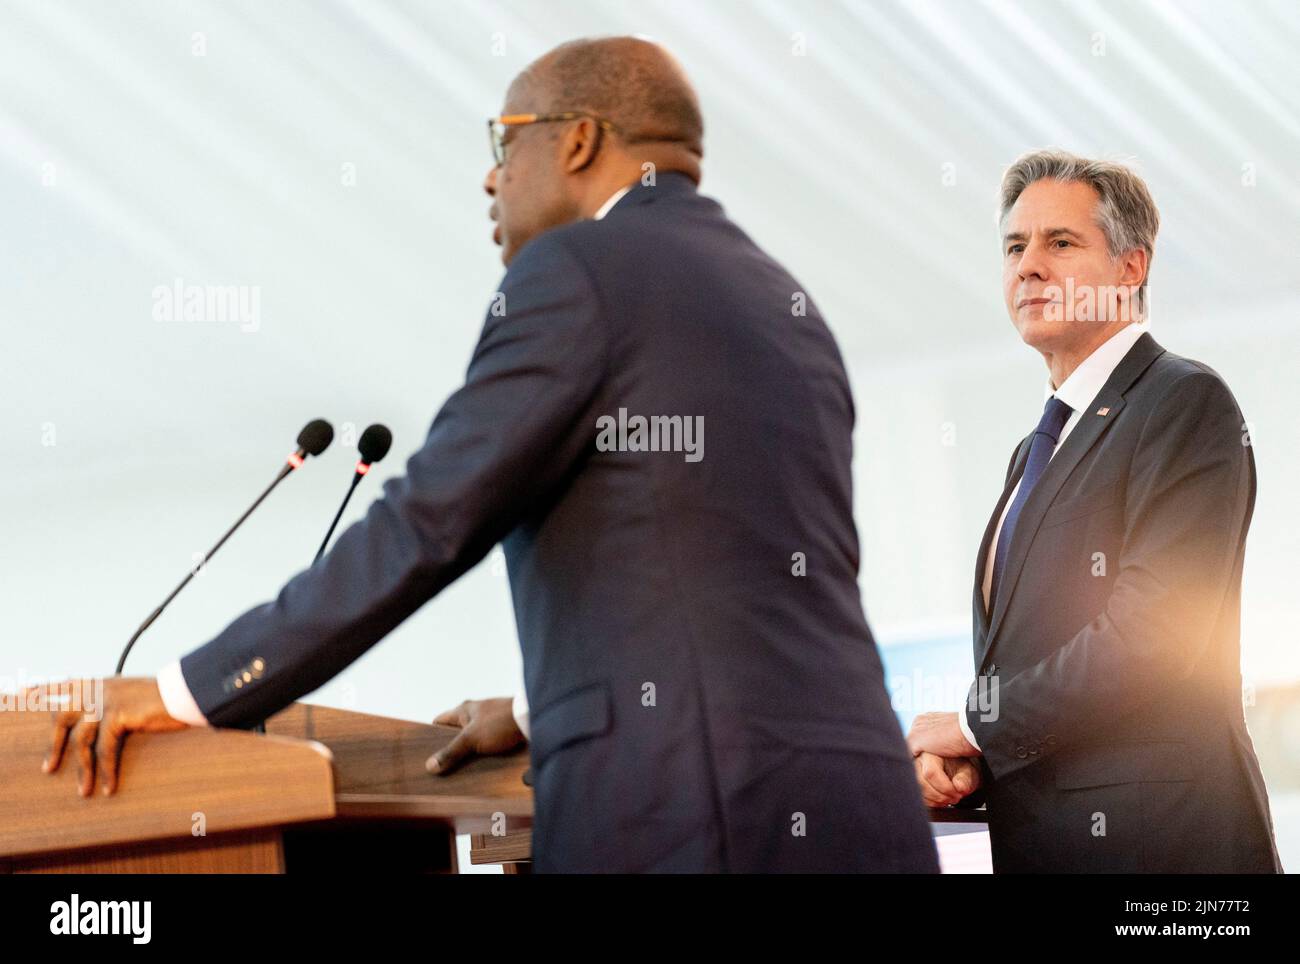 U.S. Secretary of State Antony Blinken and DRC Foreign Minister Christophe Lutundula hold a news conference at Cite de l’OUA in Kinshasa, Democratic Republic of the Congo, August 9, 2022. Andrew Harnik/Pool via REUTERS Stock Photo